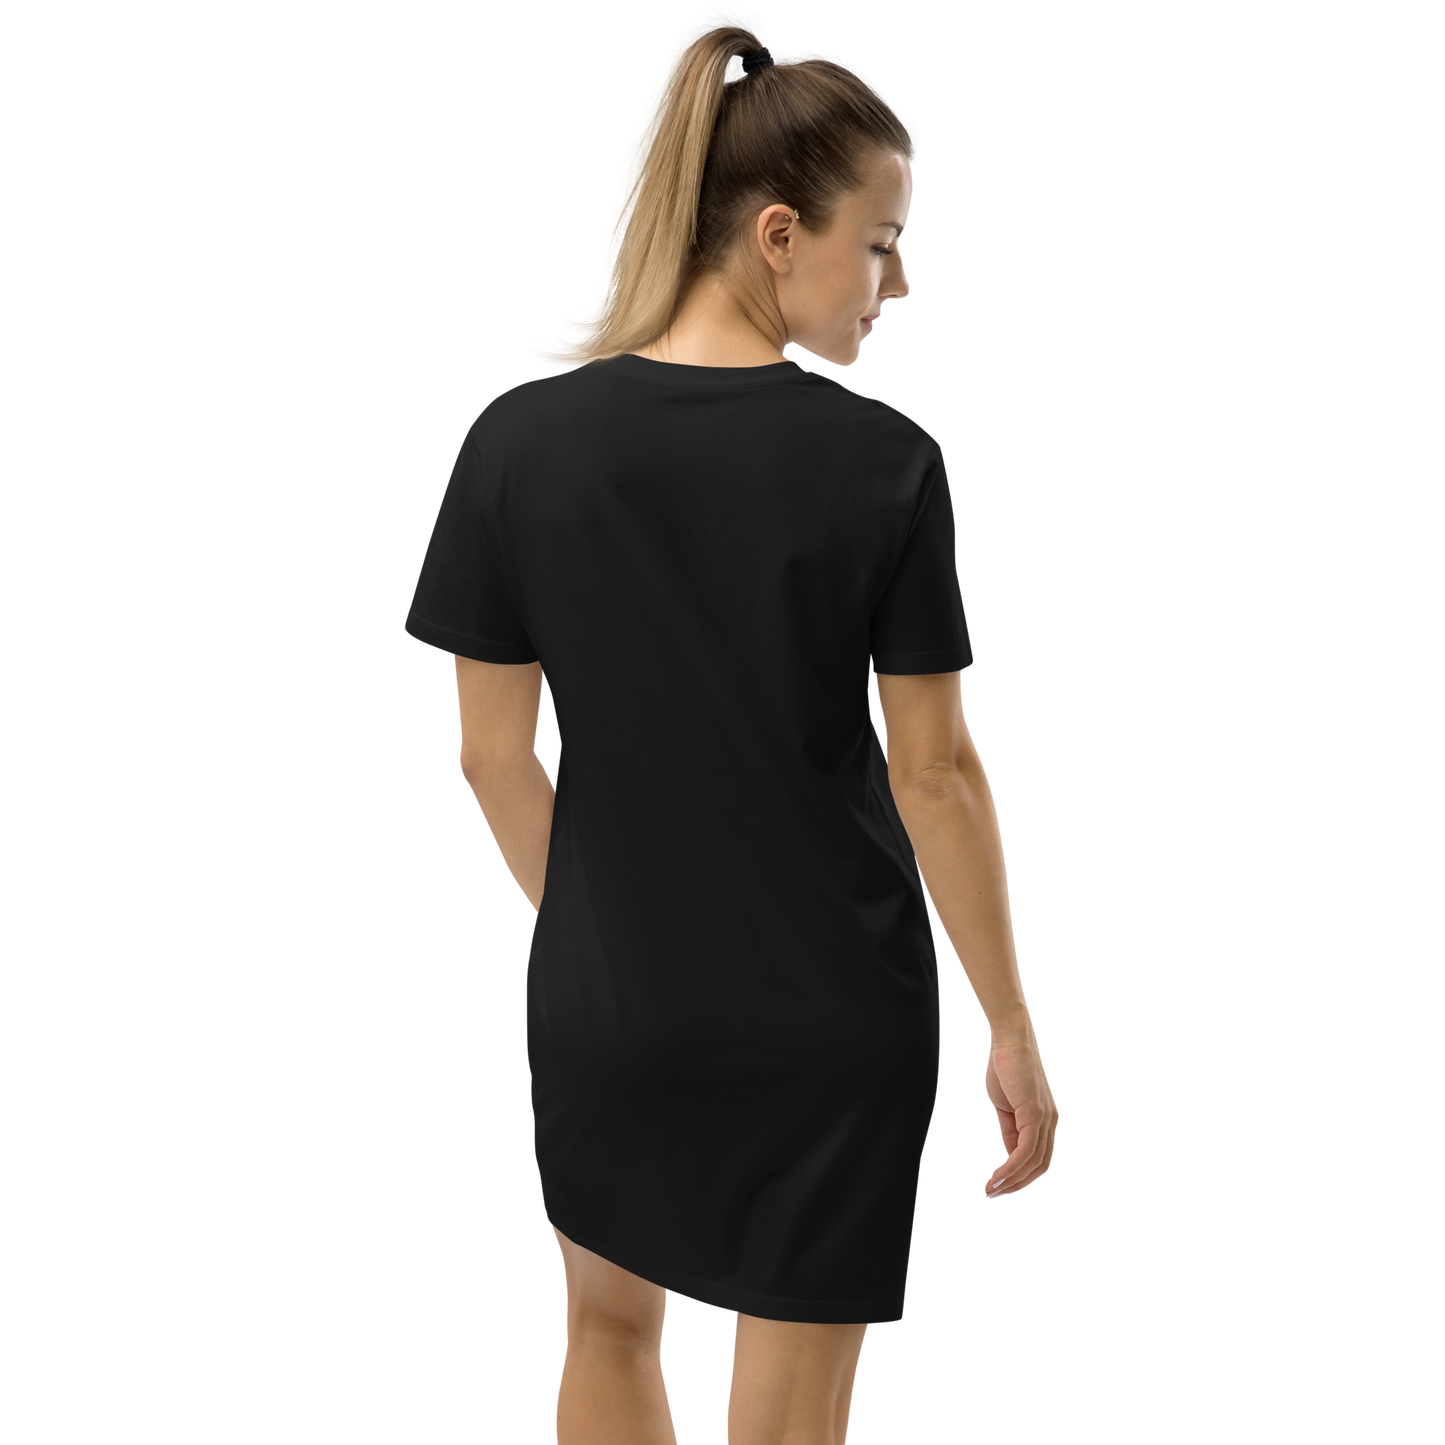 Fit at Every Age Organic Cotton T-shirt Dress - Darker Colors